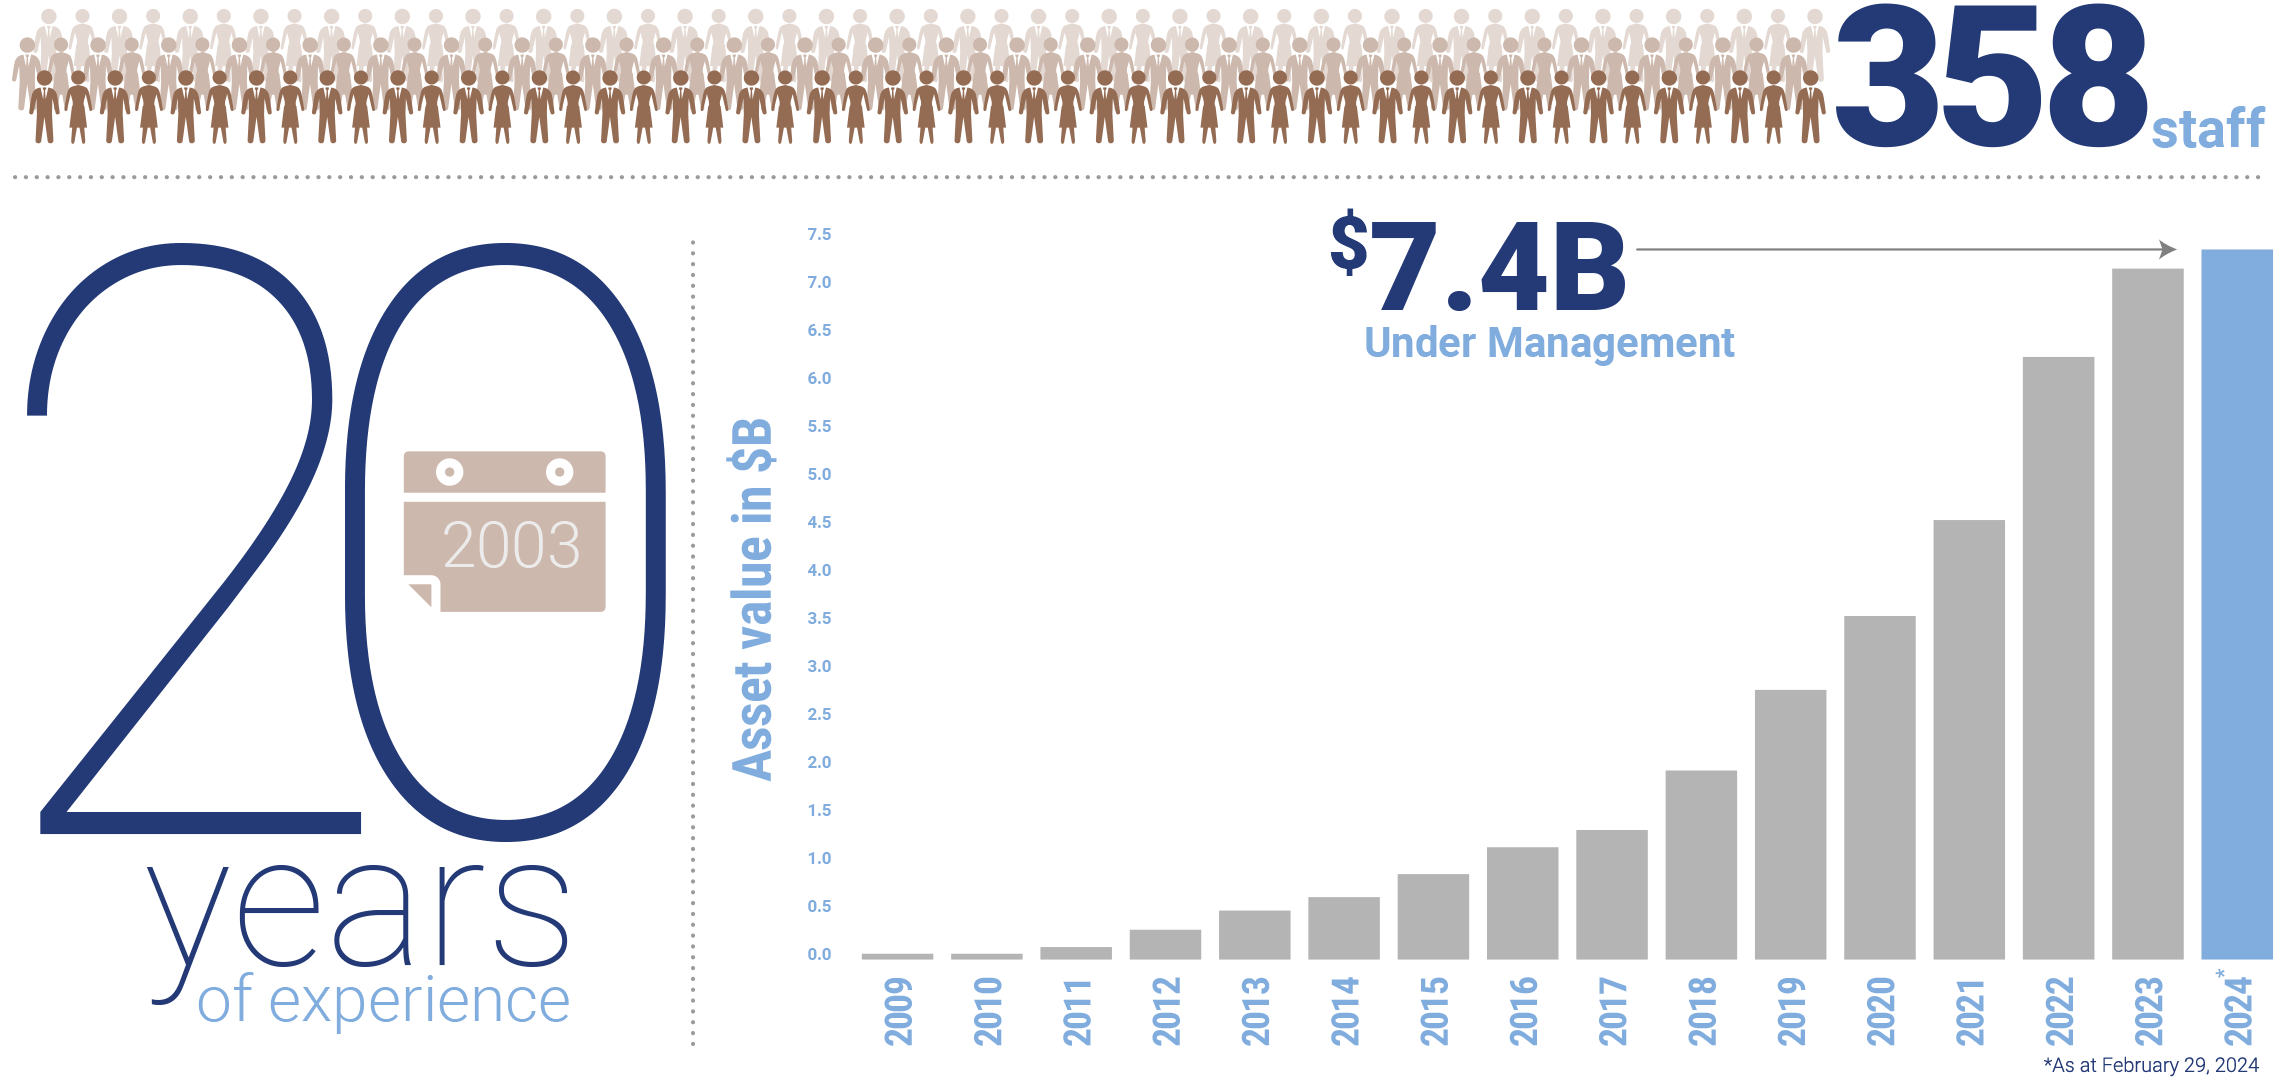 19 years of experience, 295 staff, over $5.7 billion under management as of May 31, 2022